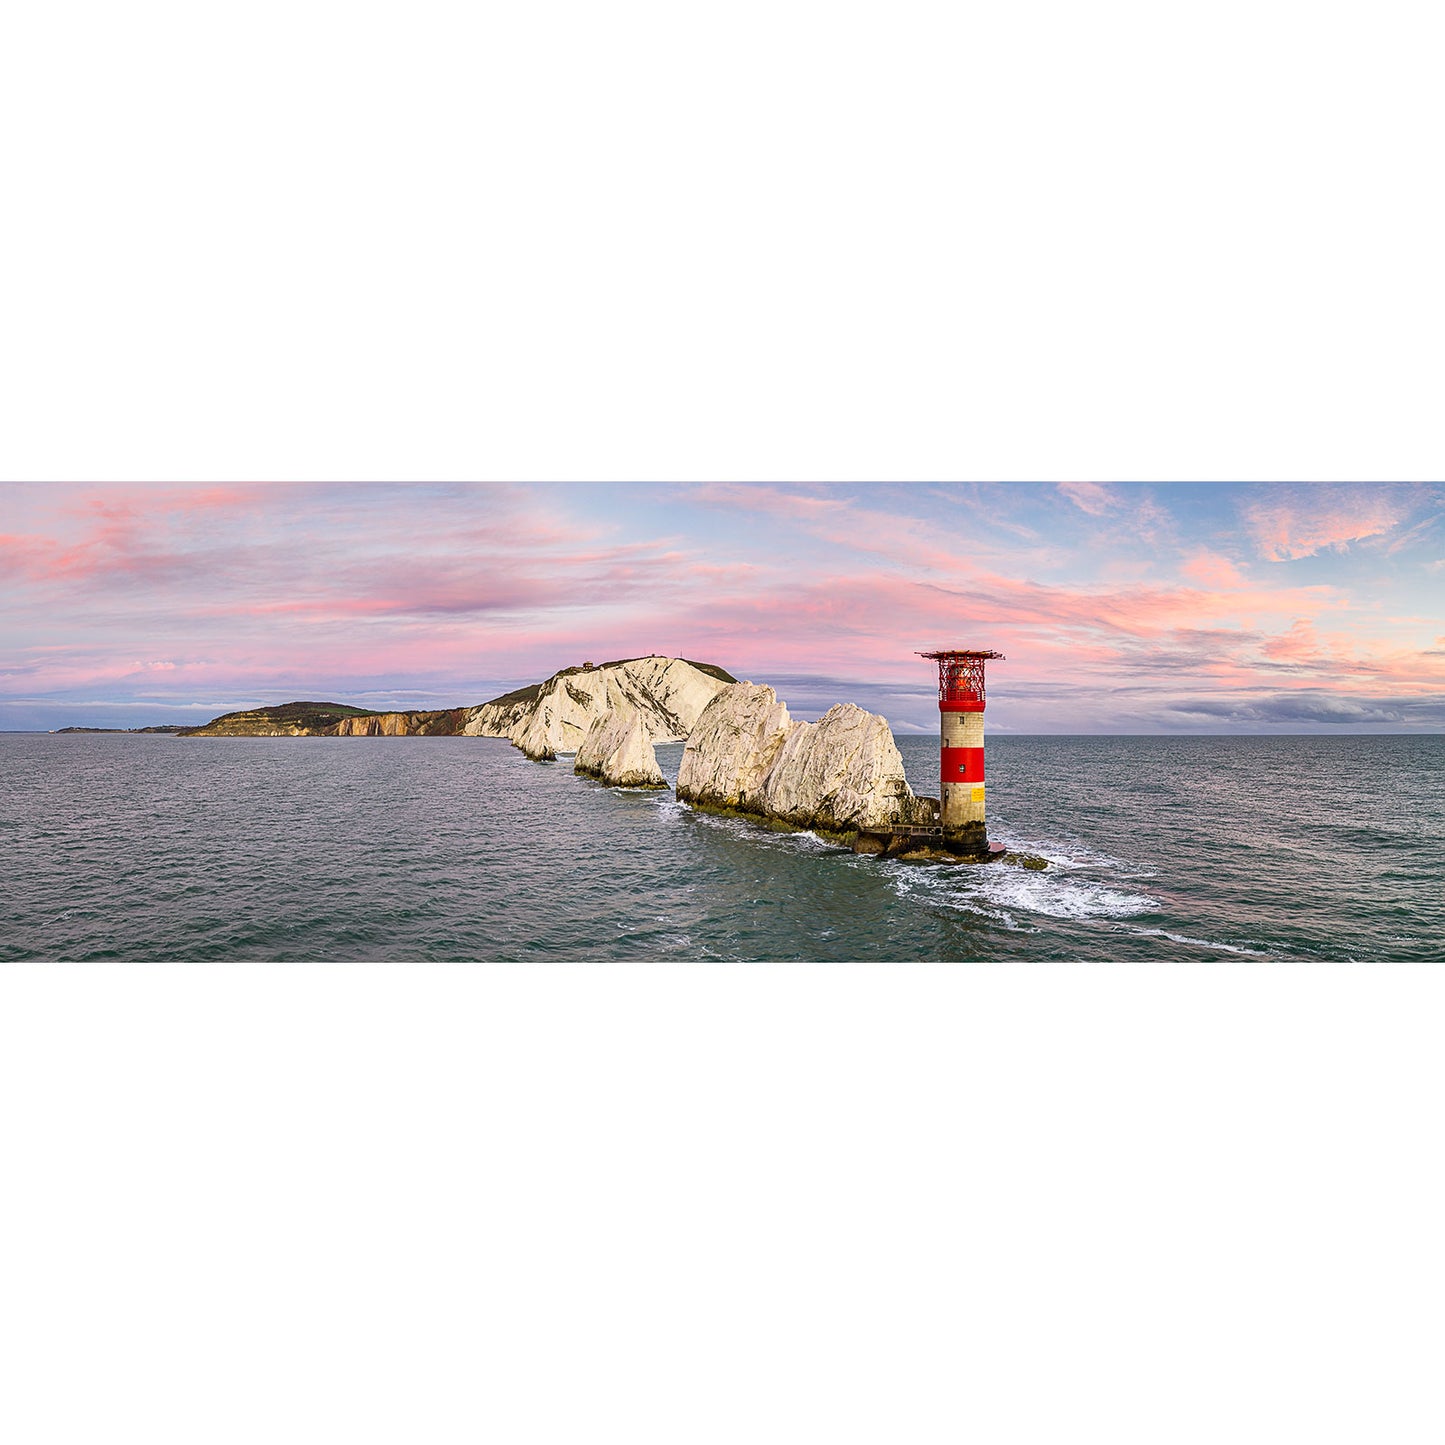 The Needles - Available Light Photography